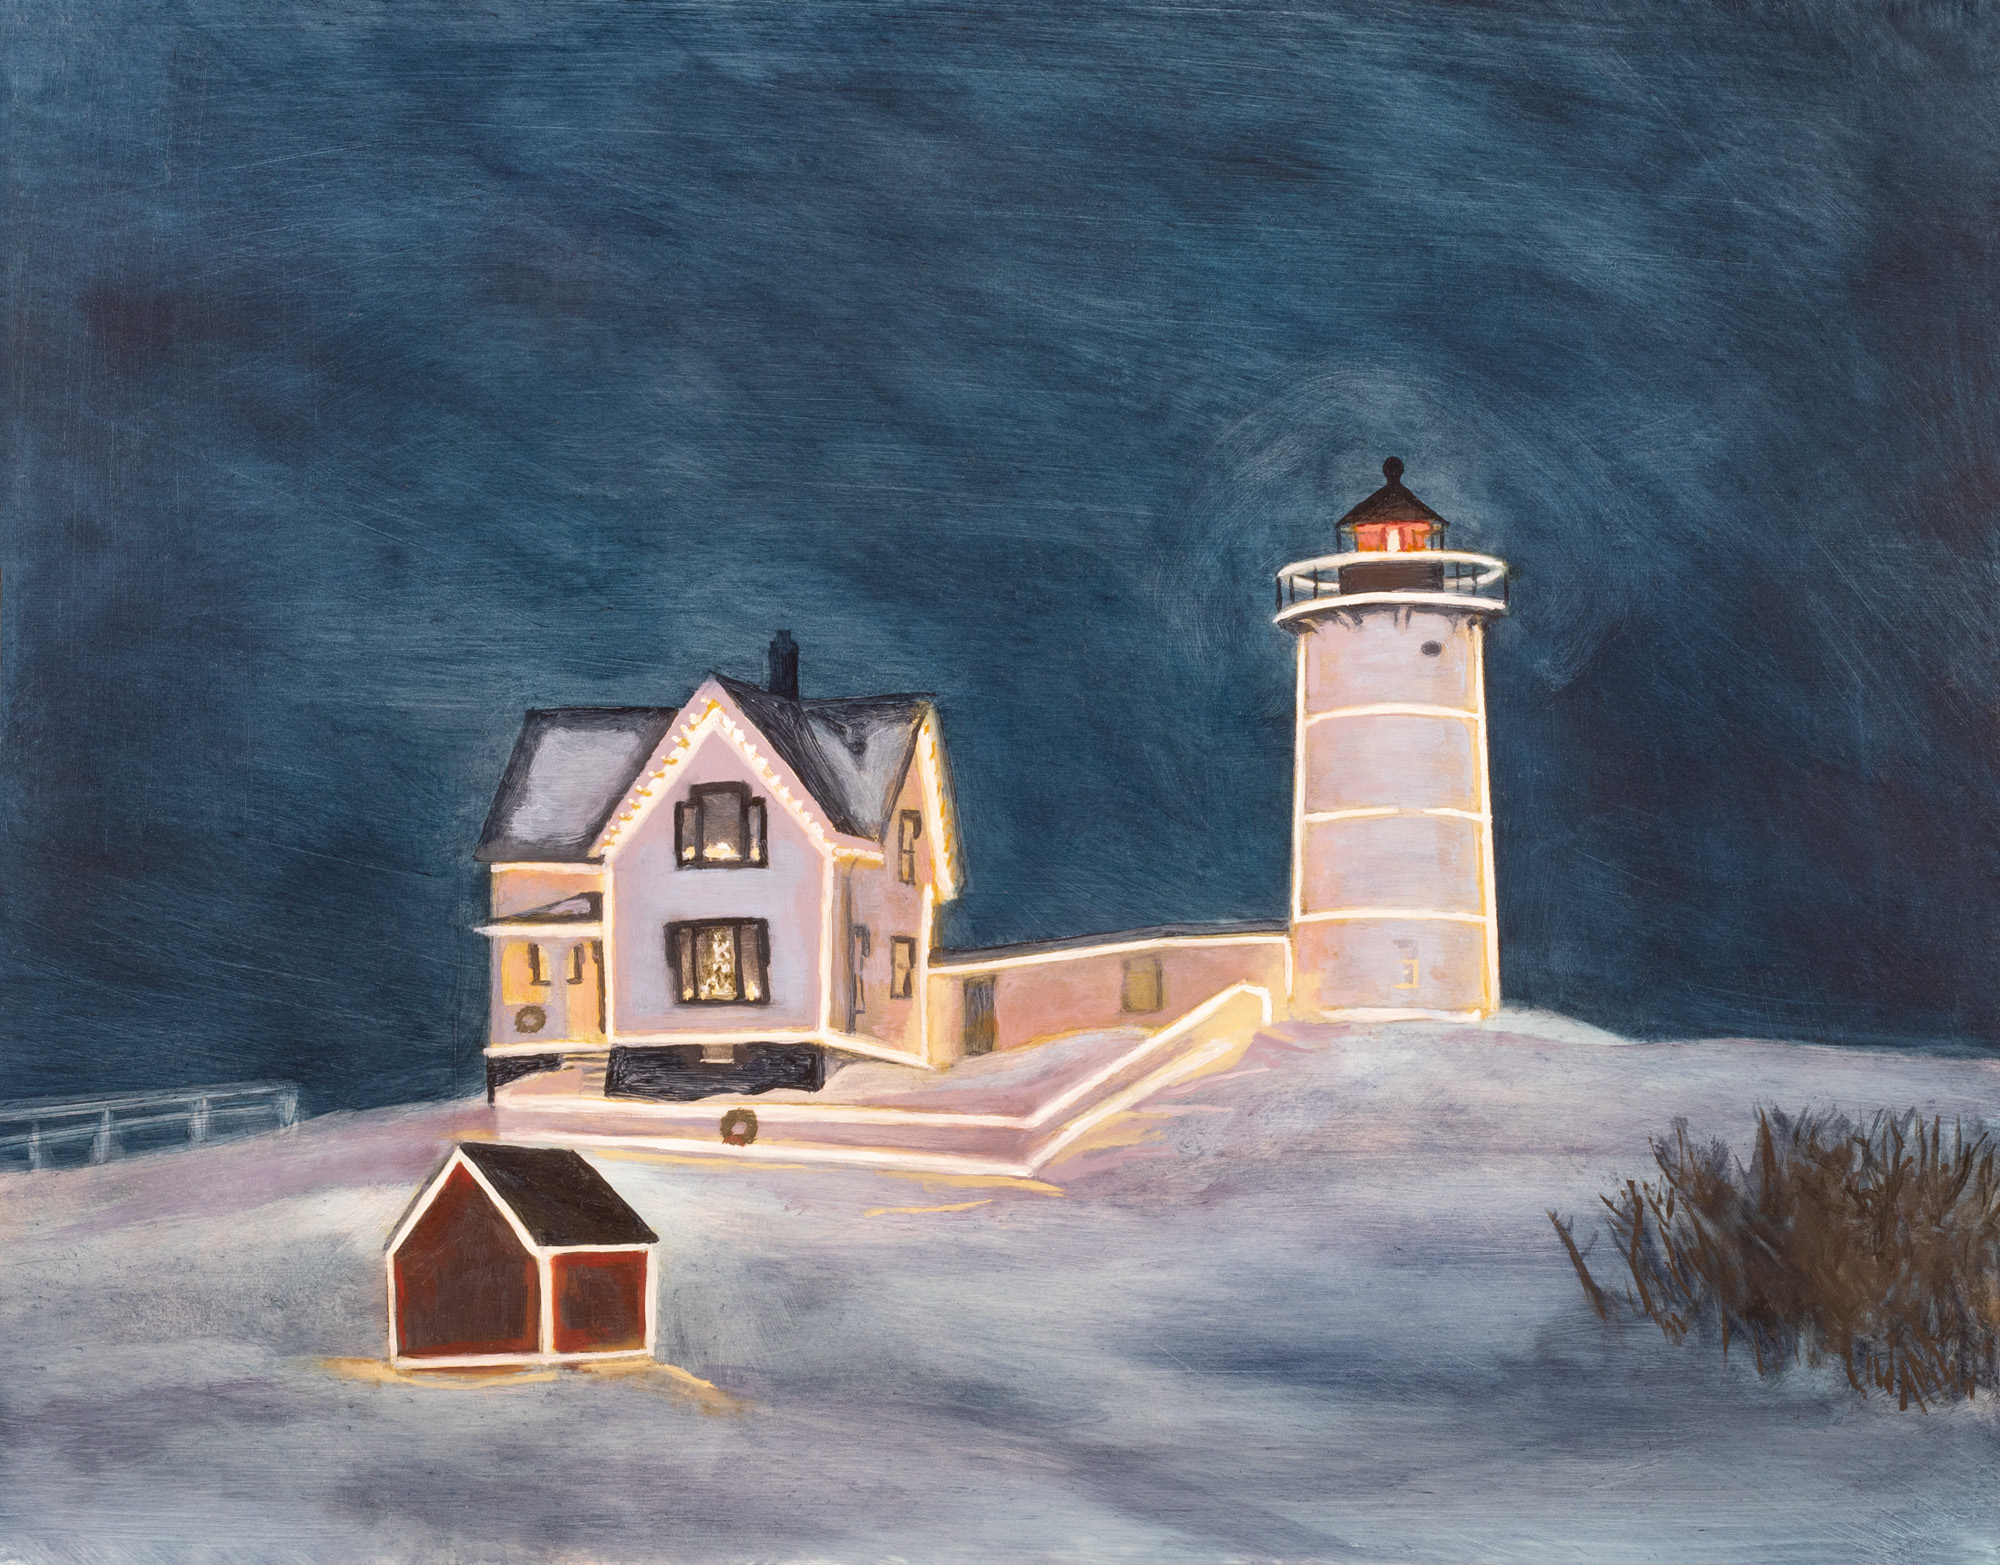 Nubble Lighthouse at Christmas, oil on panel, 11 x 14 in., $450.00